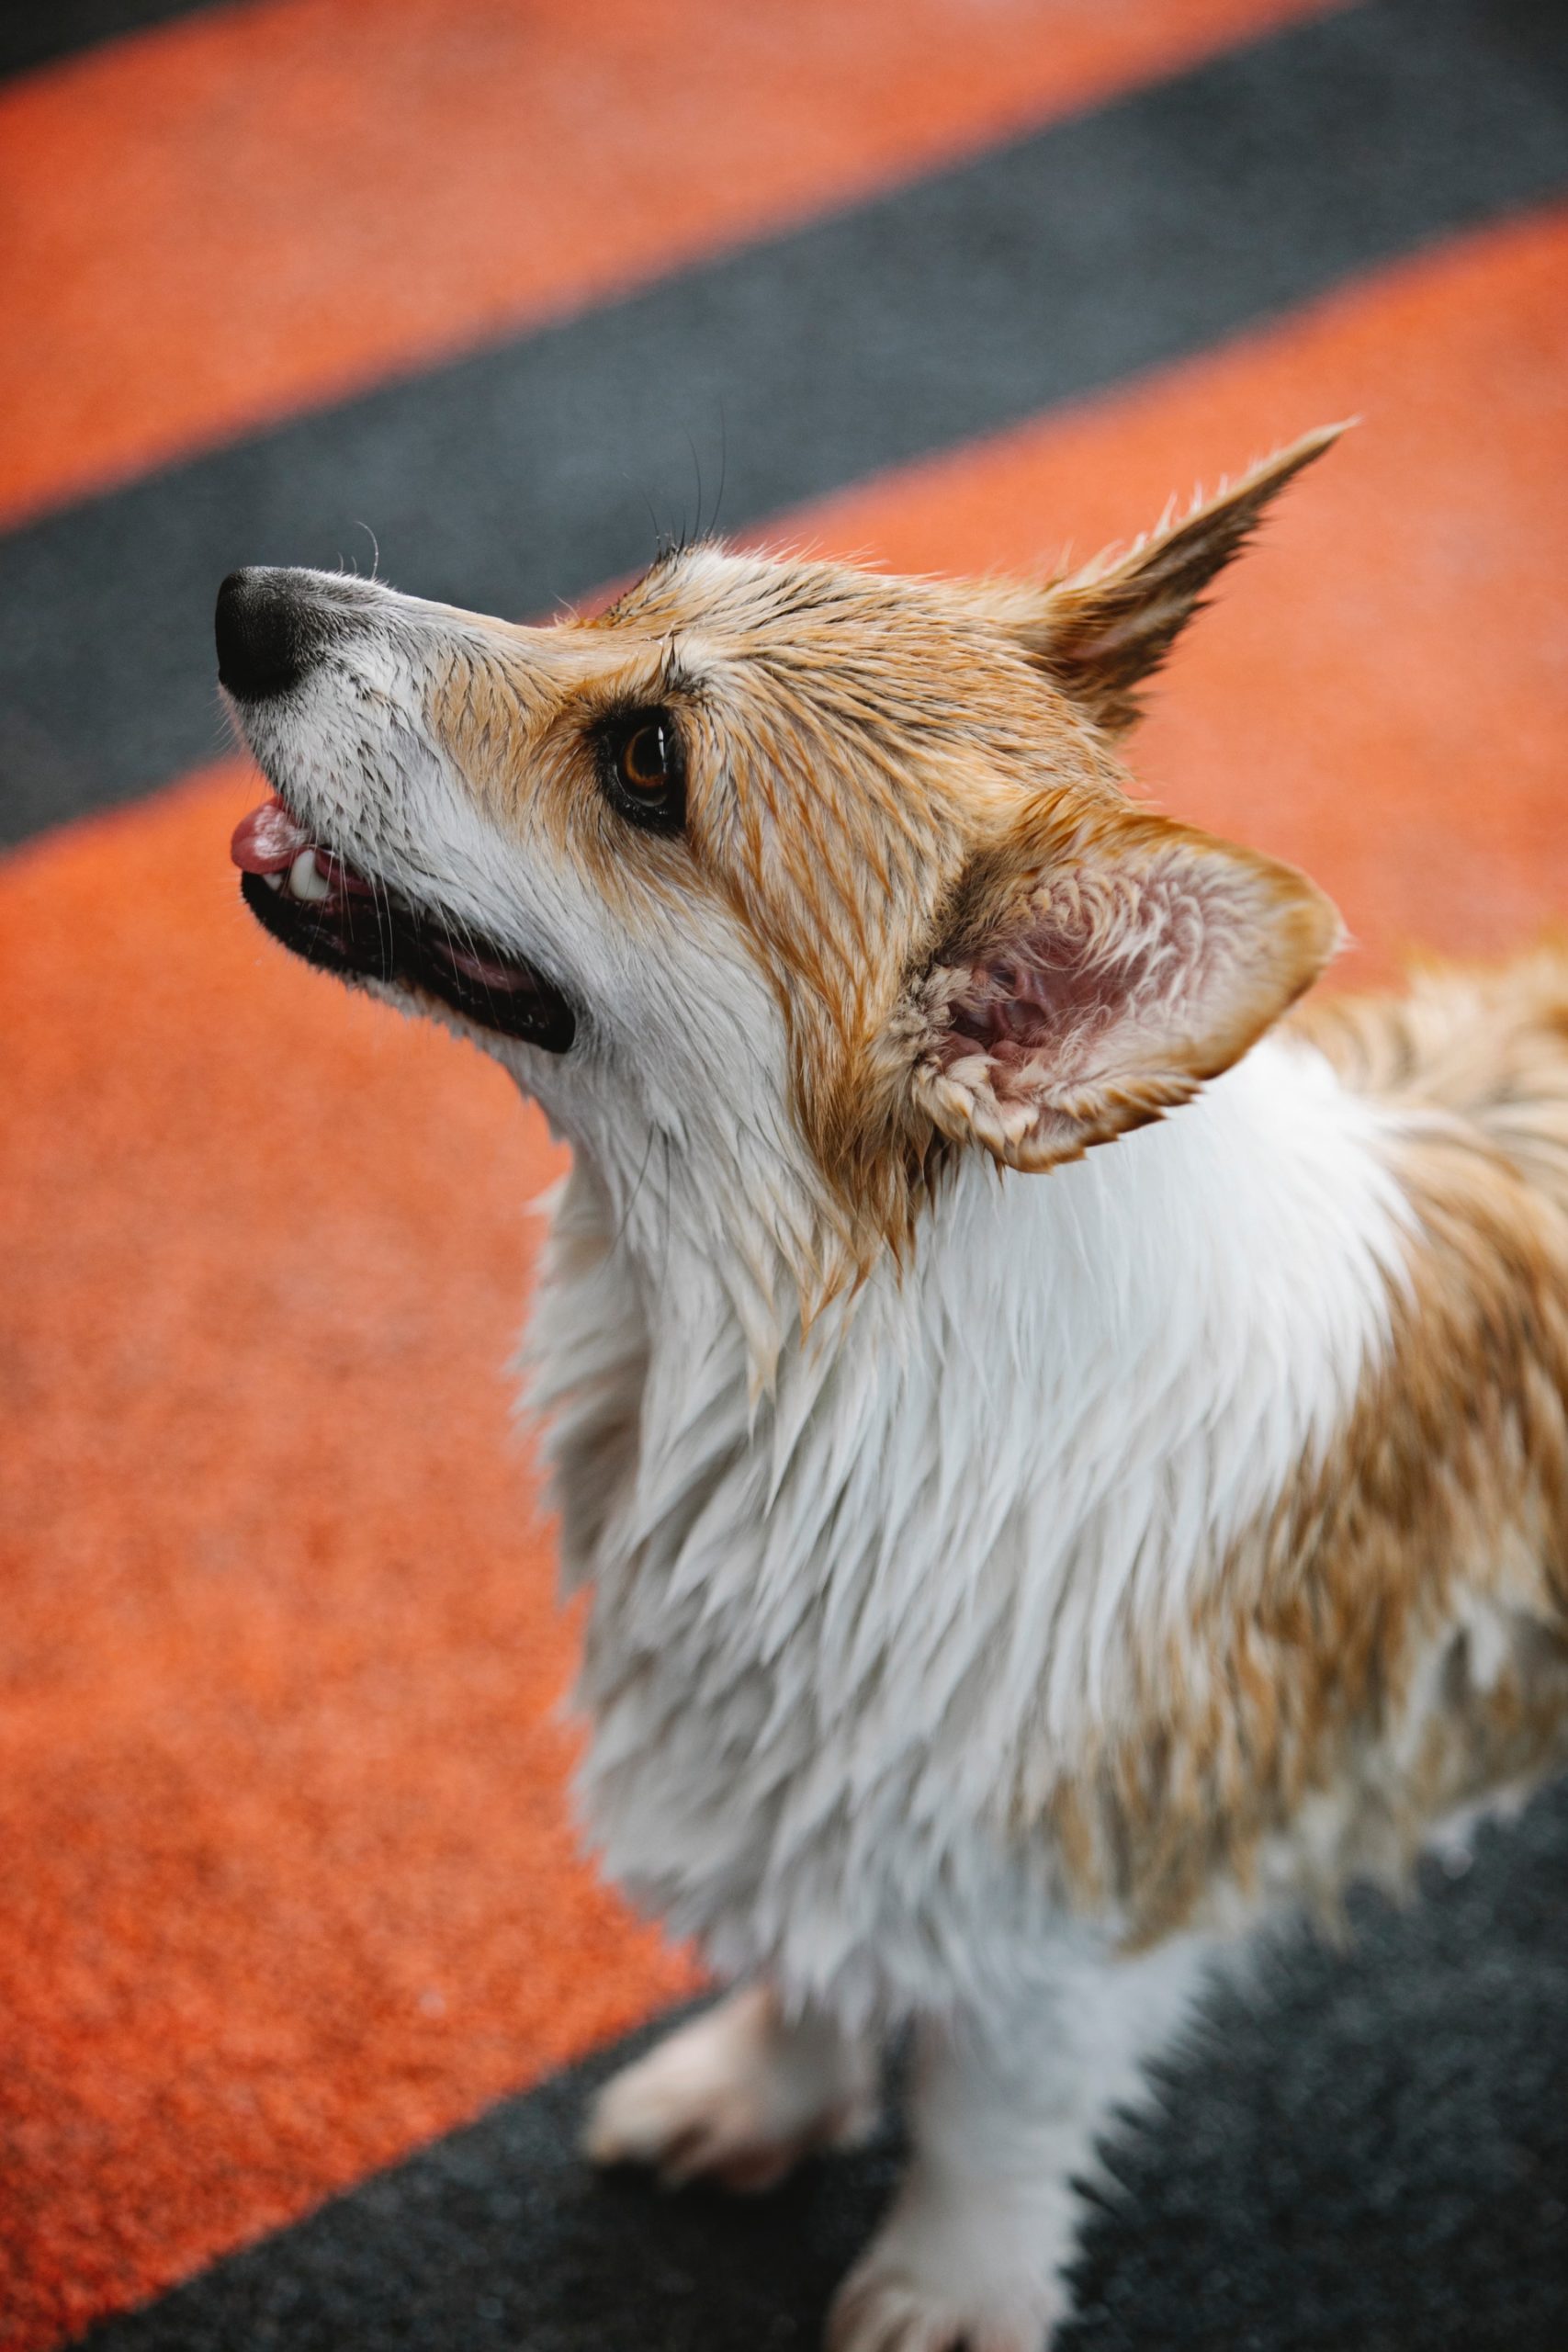 Terrible Owners leave Corgi tied to a tree during Storm; TikToker comes to the Rescue